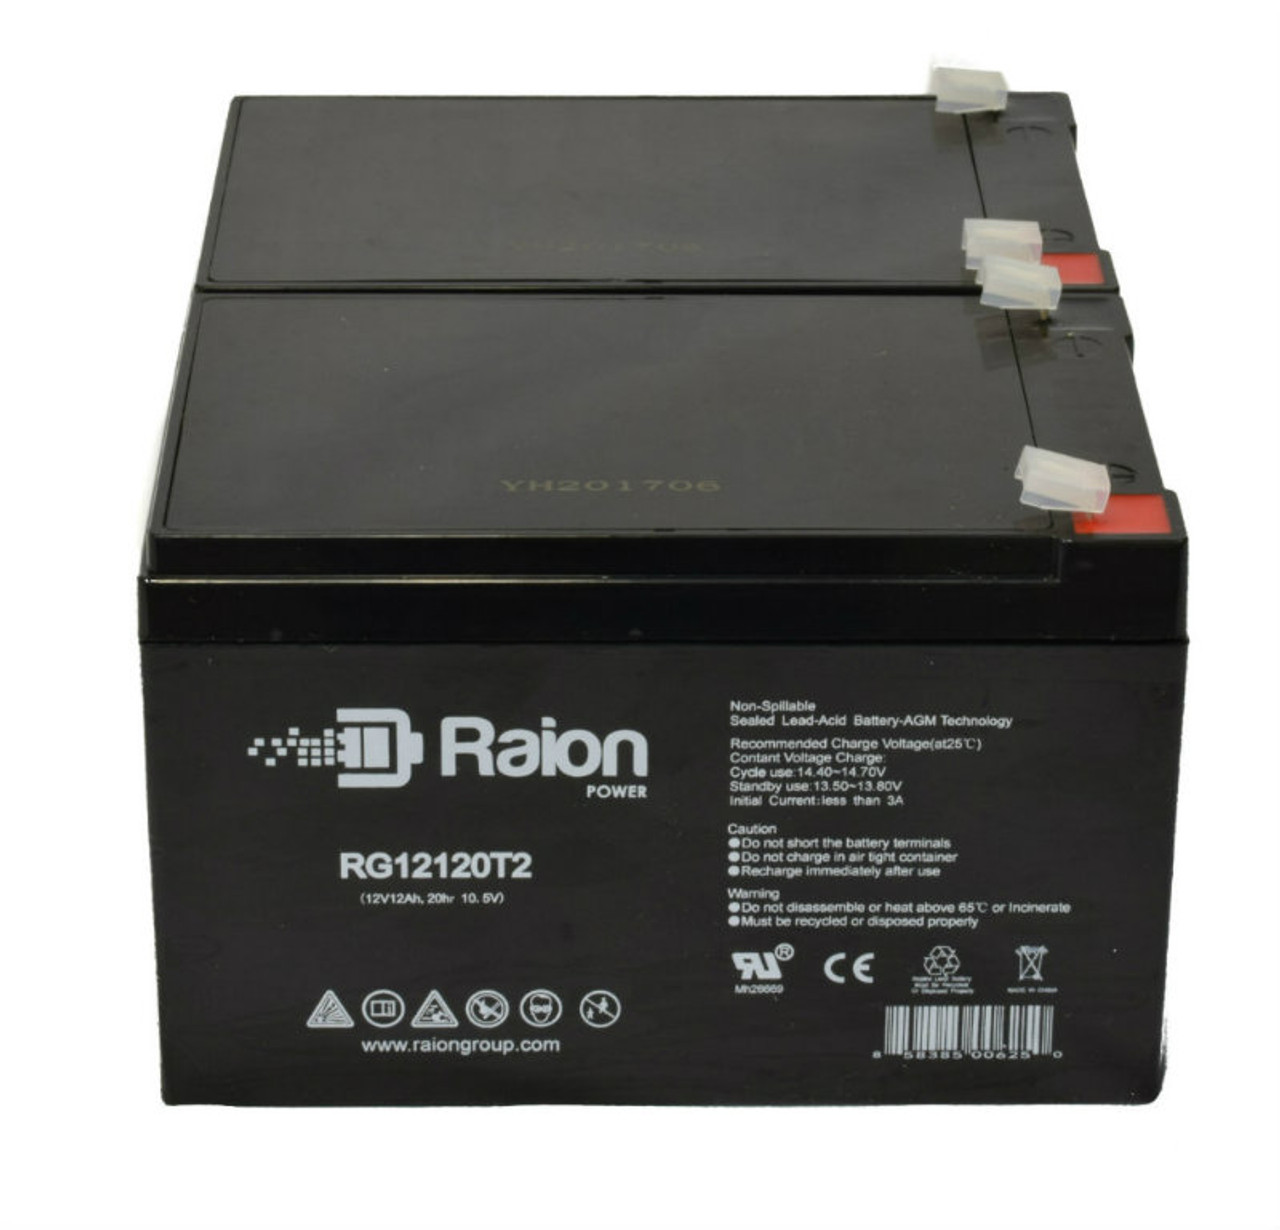 Raion Power RG12120T2 Replacement Battery Set for Drive Medical Design Bobcat 3 Wheel Mobility Scooter - 2 Pack